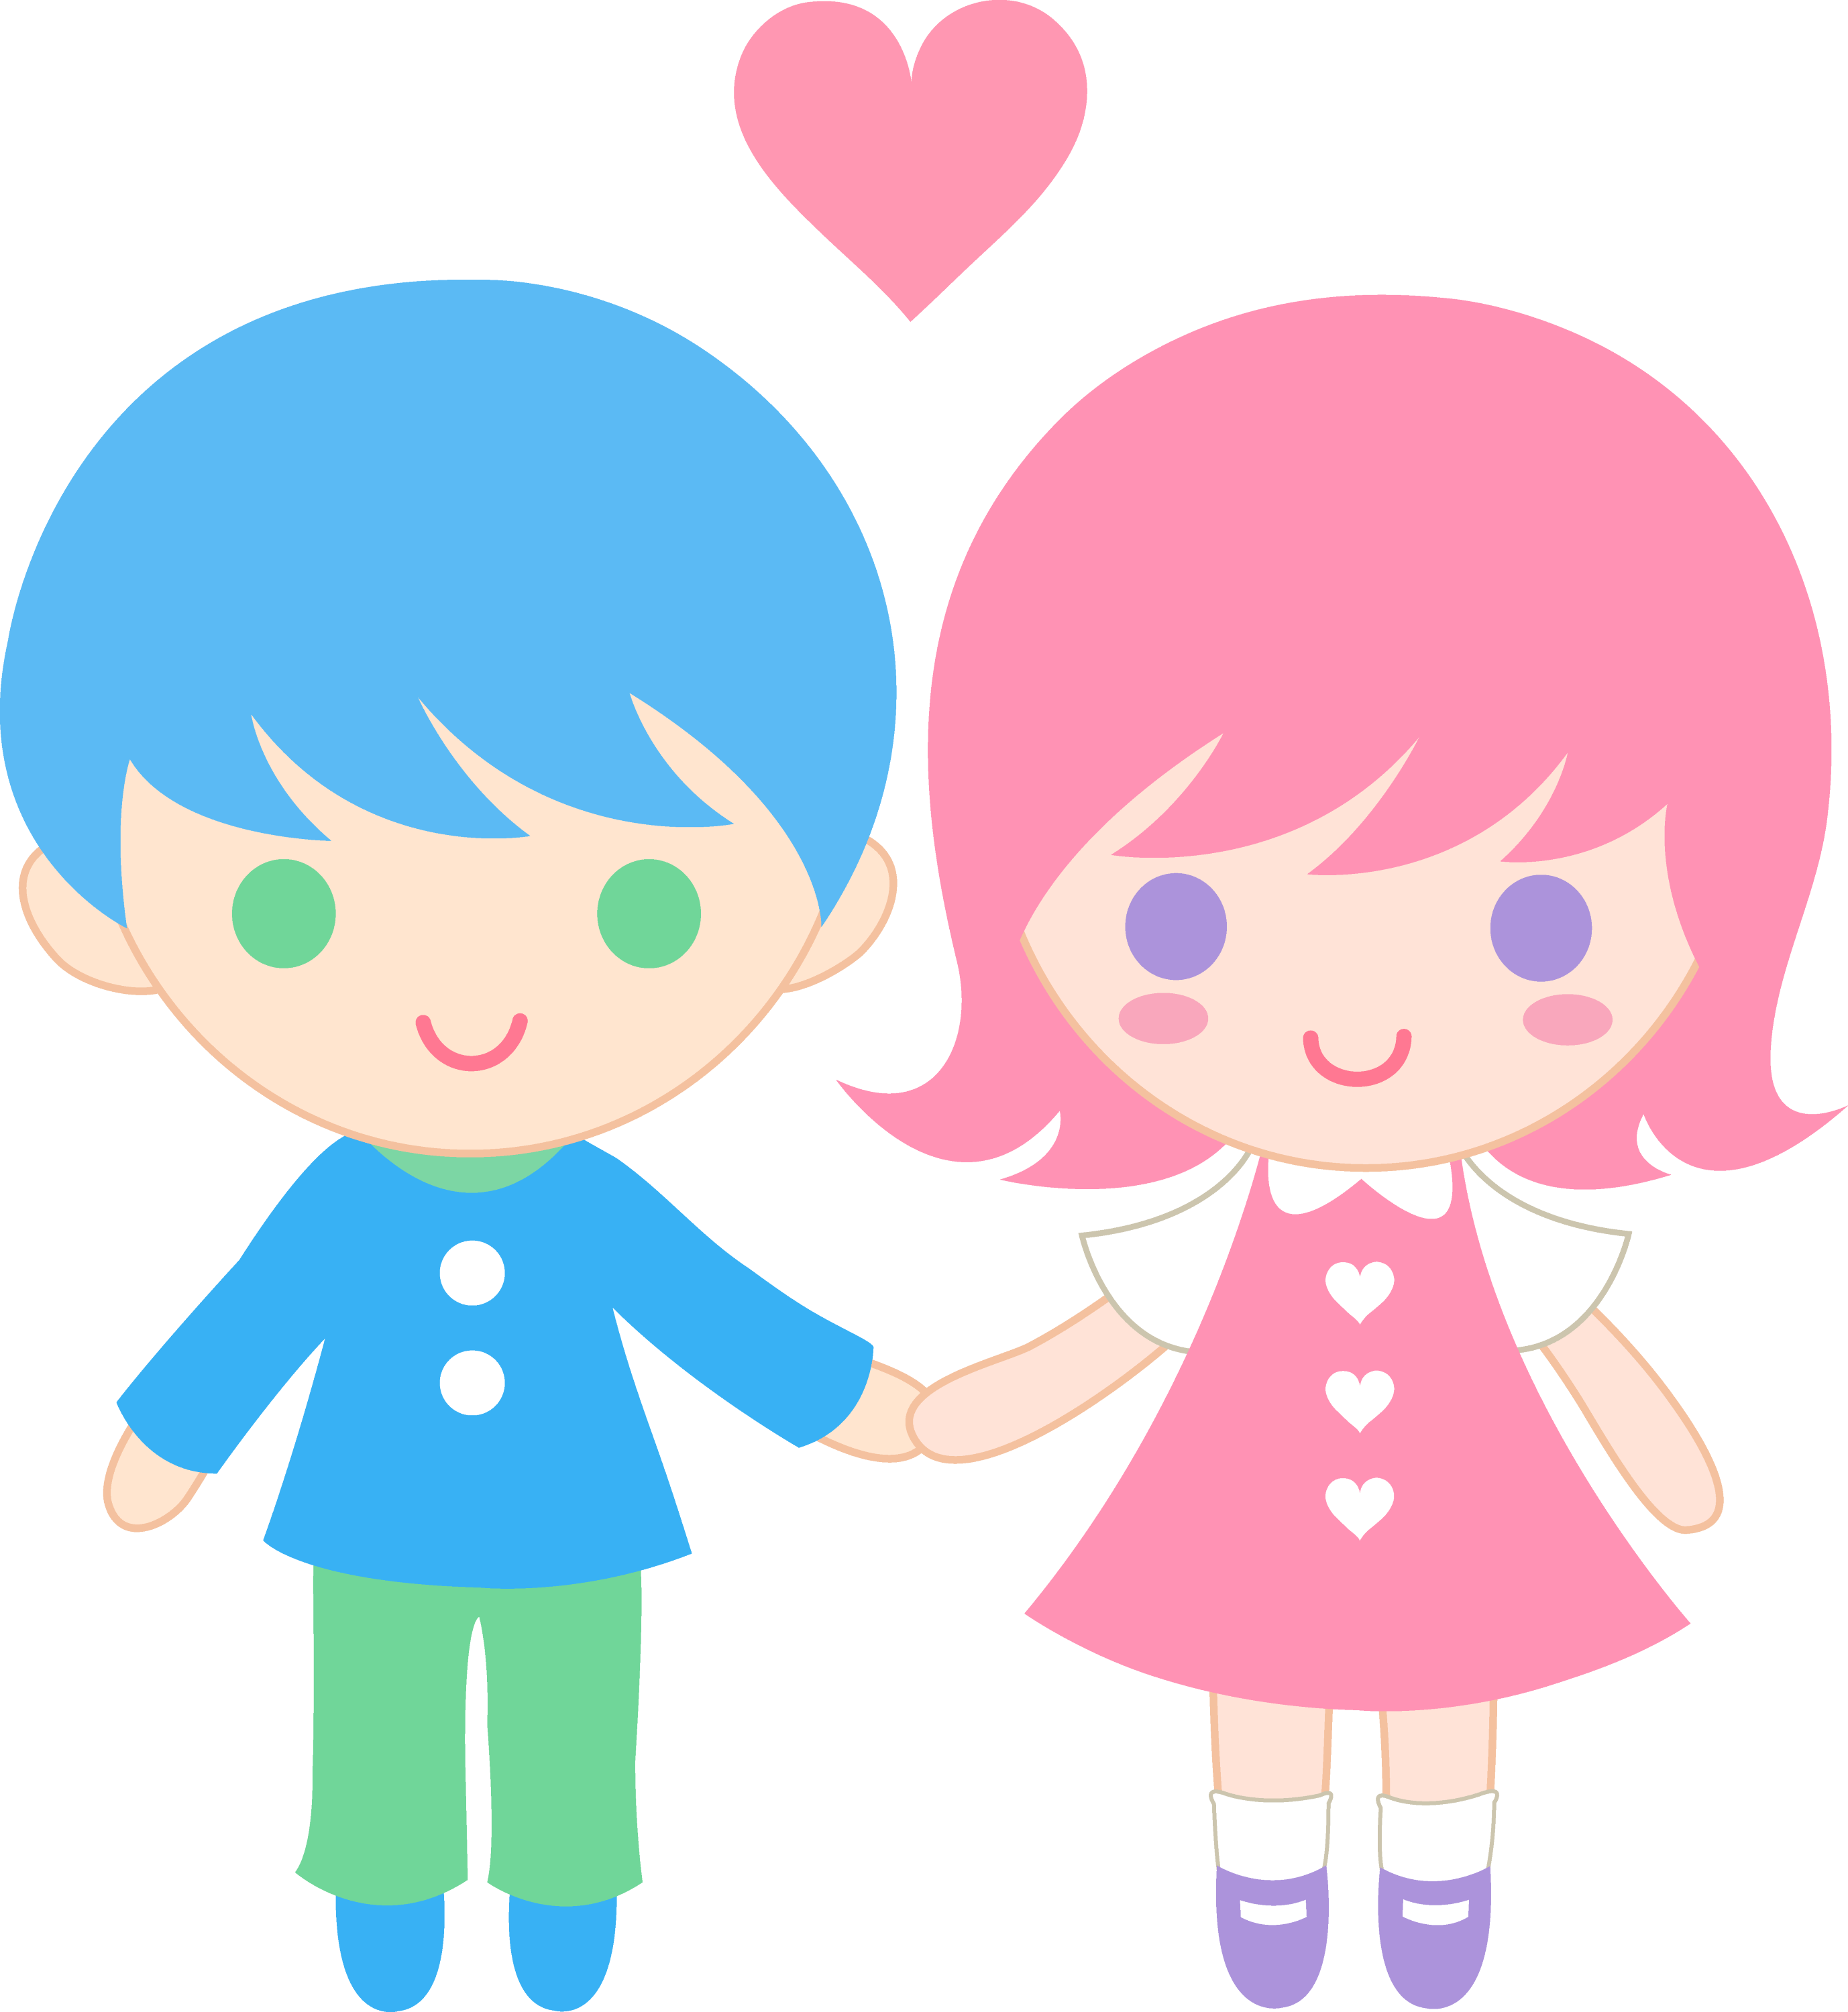 clipart of boy and girl - photo #39